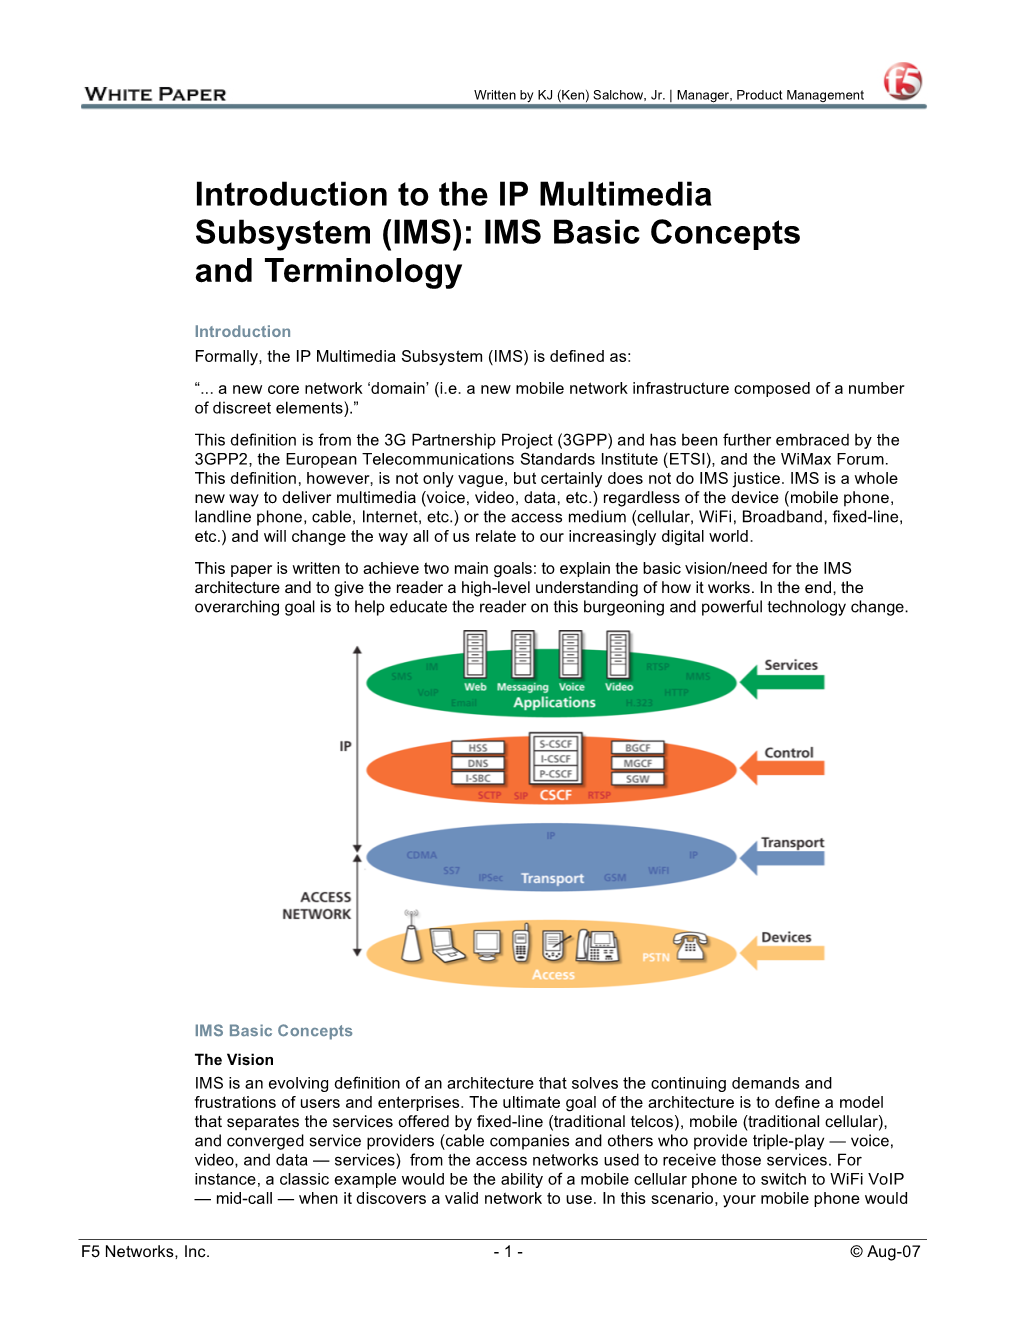 Introduction to the IP Multimedia Subsystem (IMS): IMS Basic Concepts and Terminology